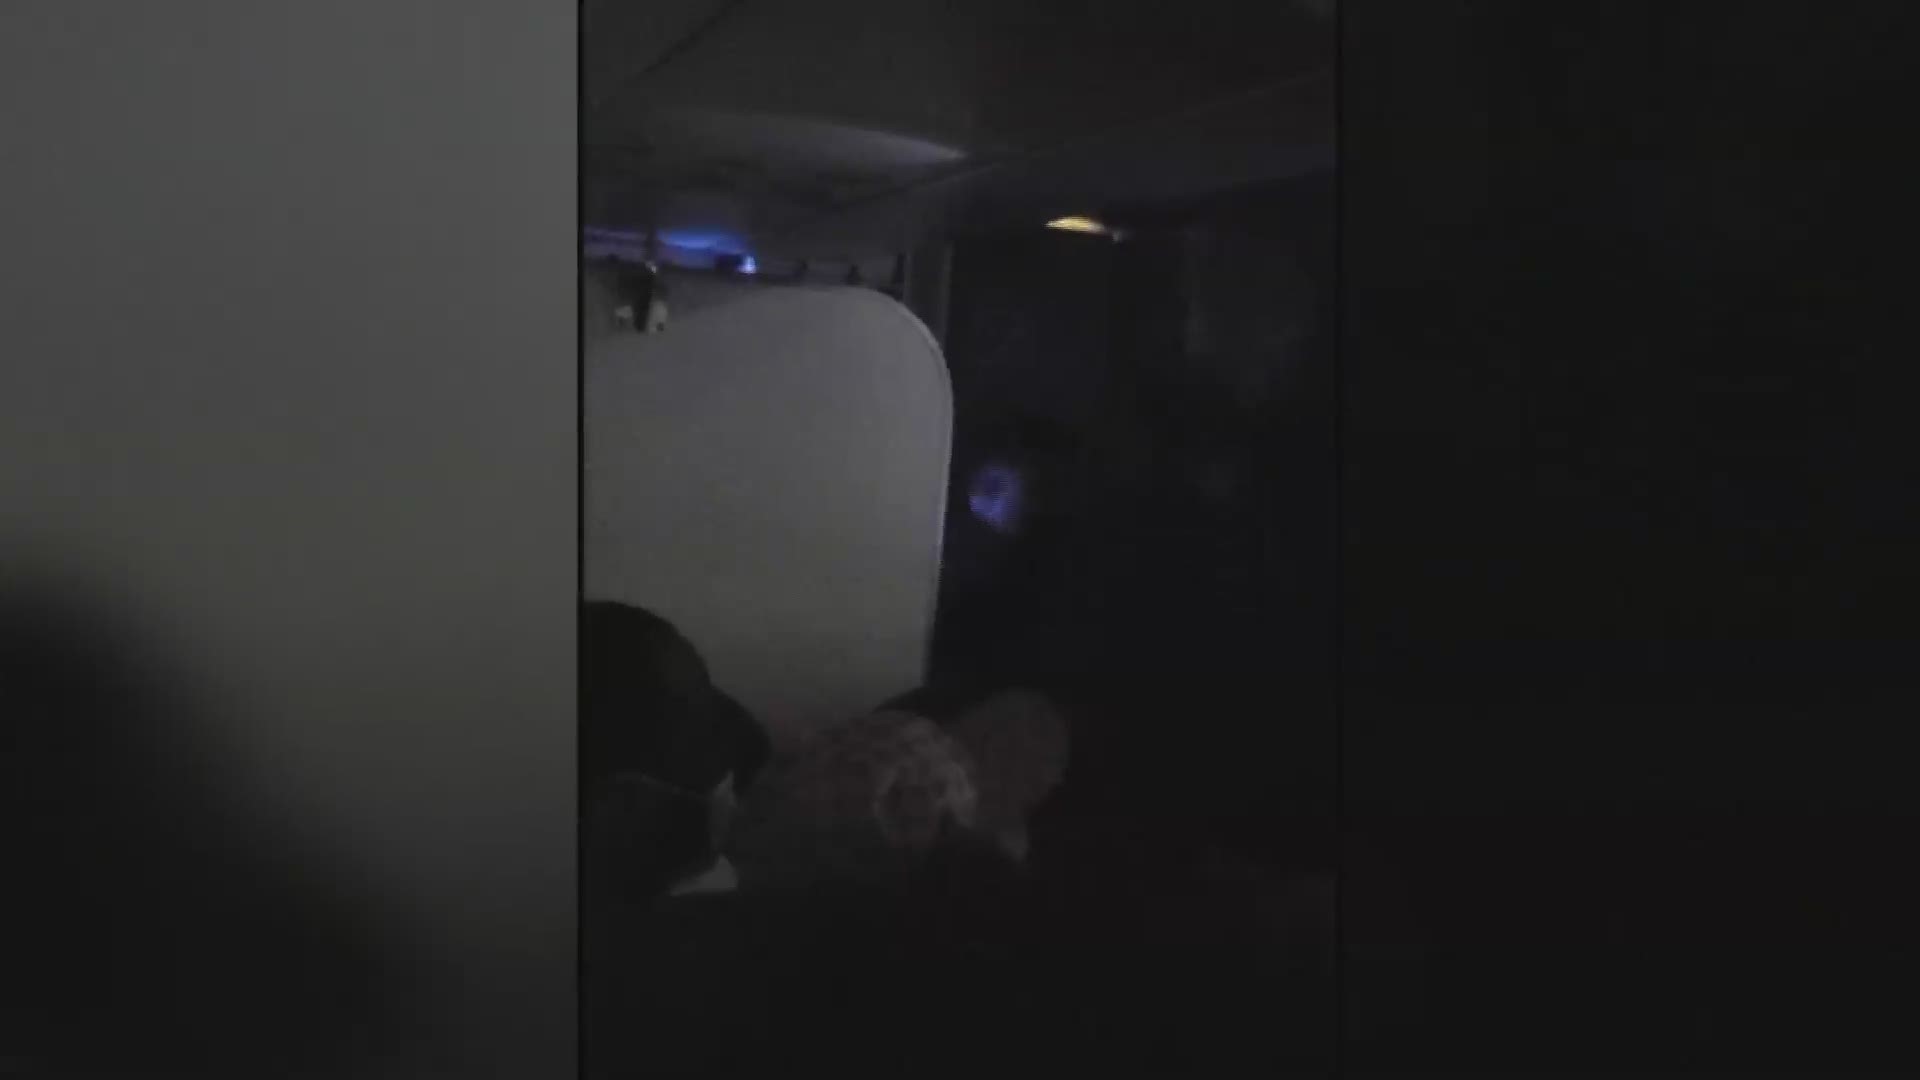 A passenger was wrestled to the floor of a Spirit Airlines plane after he tried to open and emergency exit door in mid-flight.